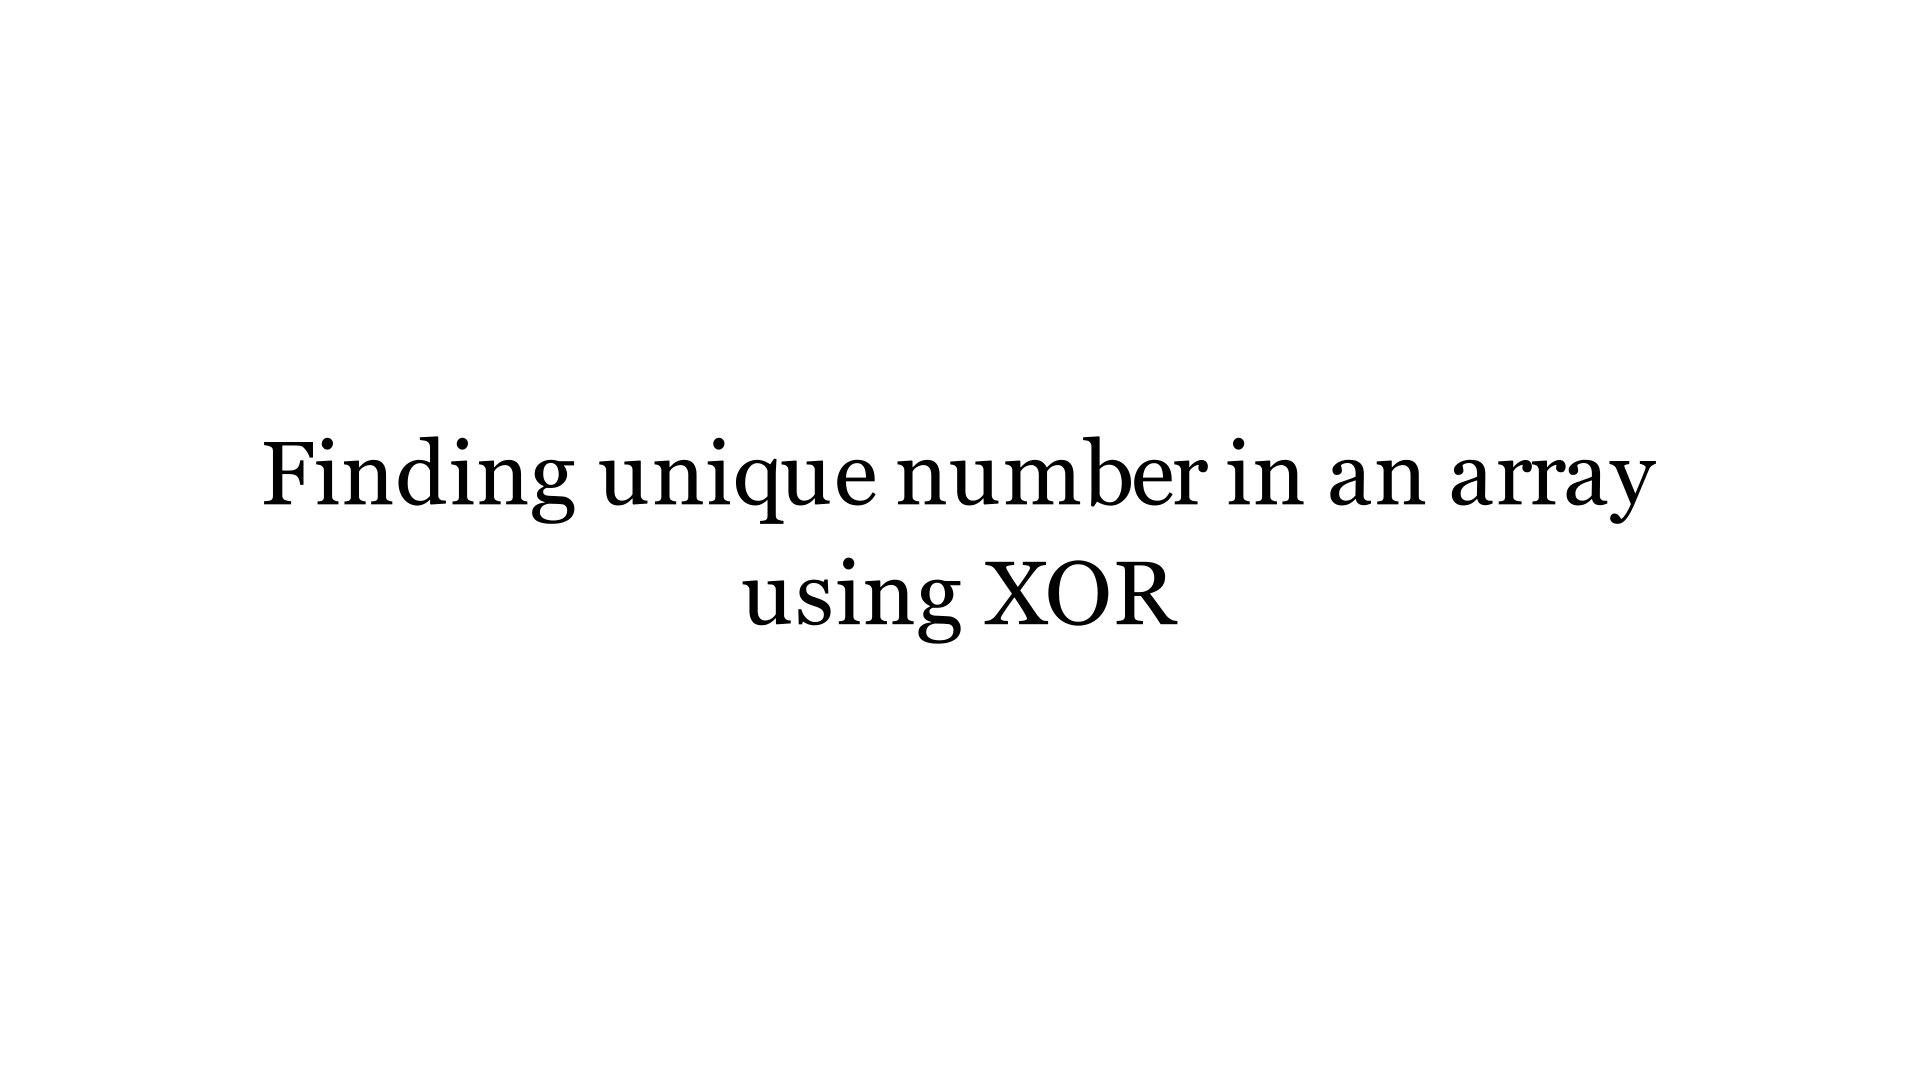 Interesting XOR property — Finding unique number in an array